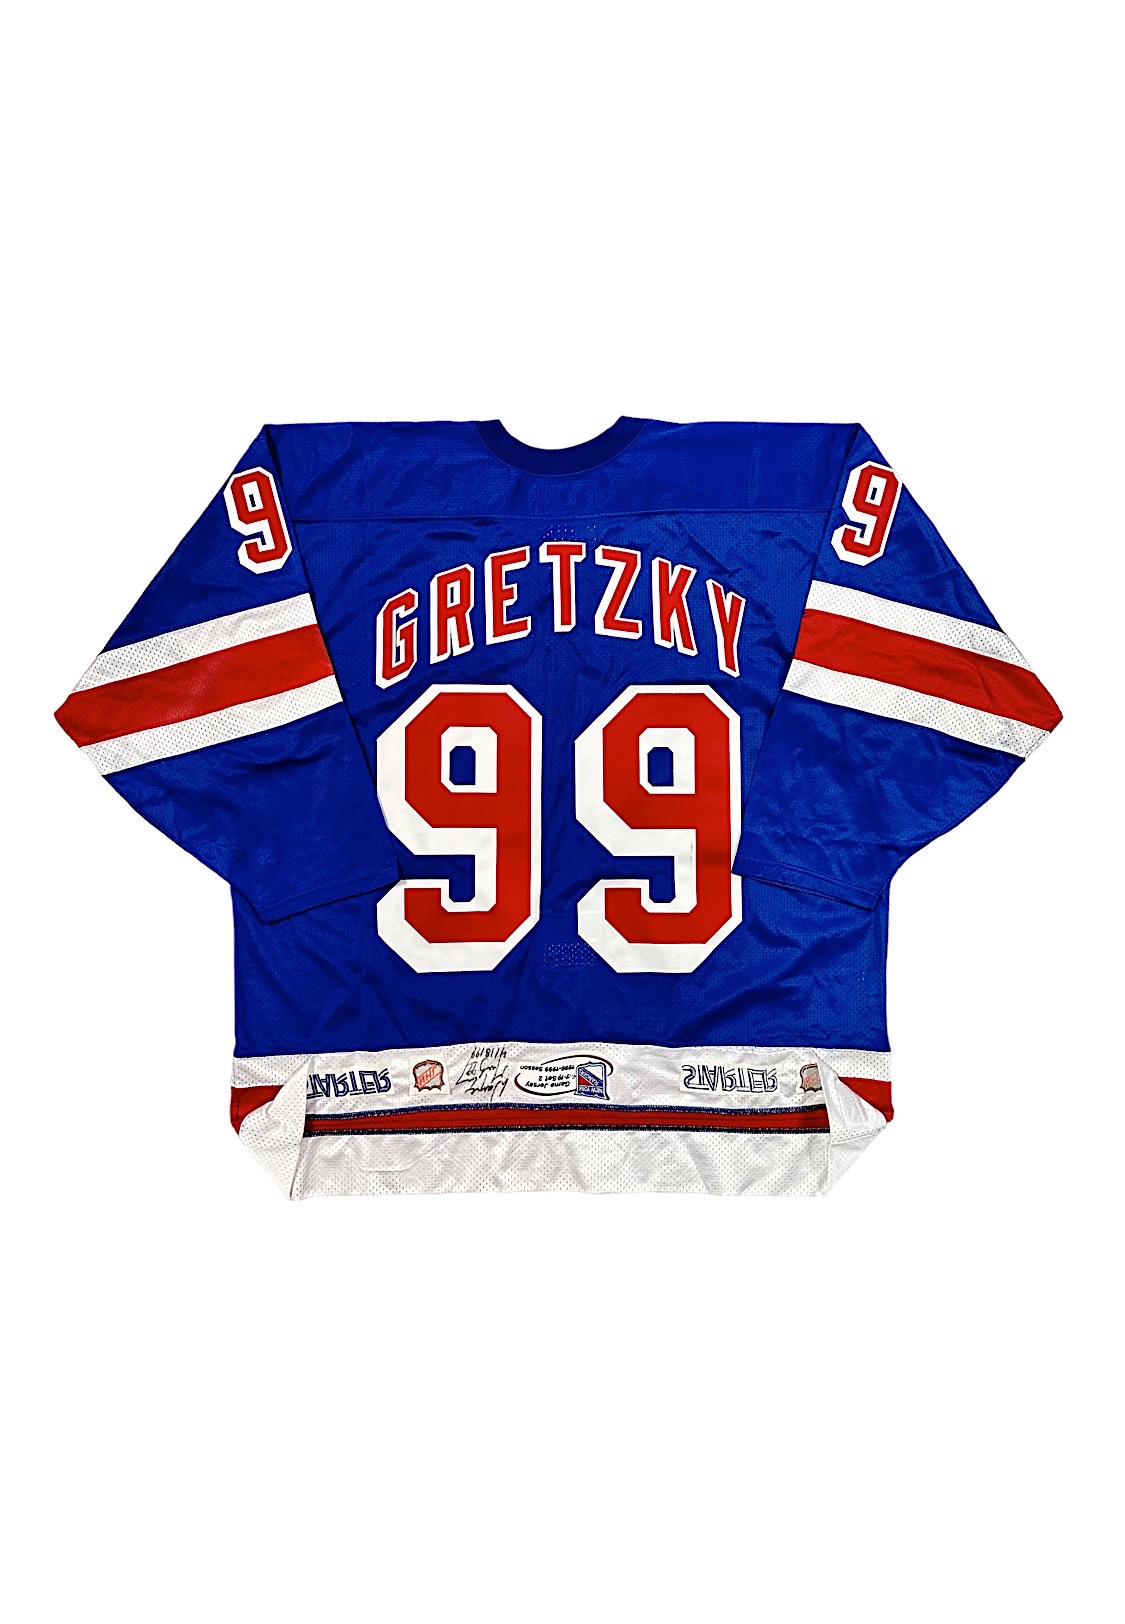 4/18/1999 Wayne Gretzky NY Rangers Final Career Game-Used & Signed Jersey (Photo-Matched To Record Setting & Last Career Point • MSGs Defining Moments)